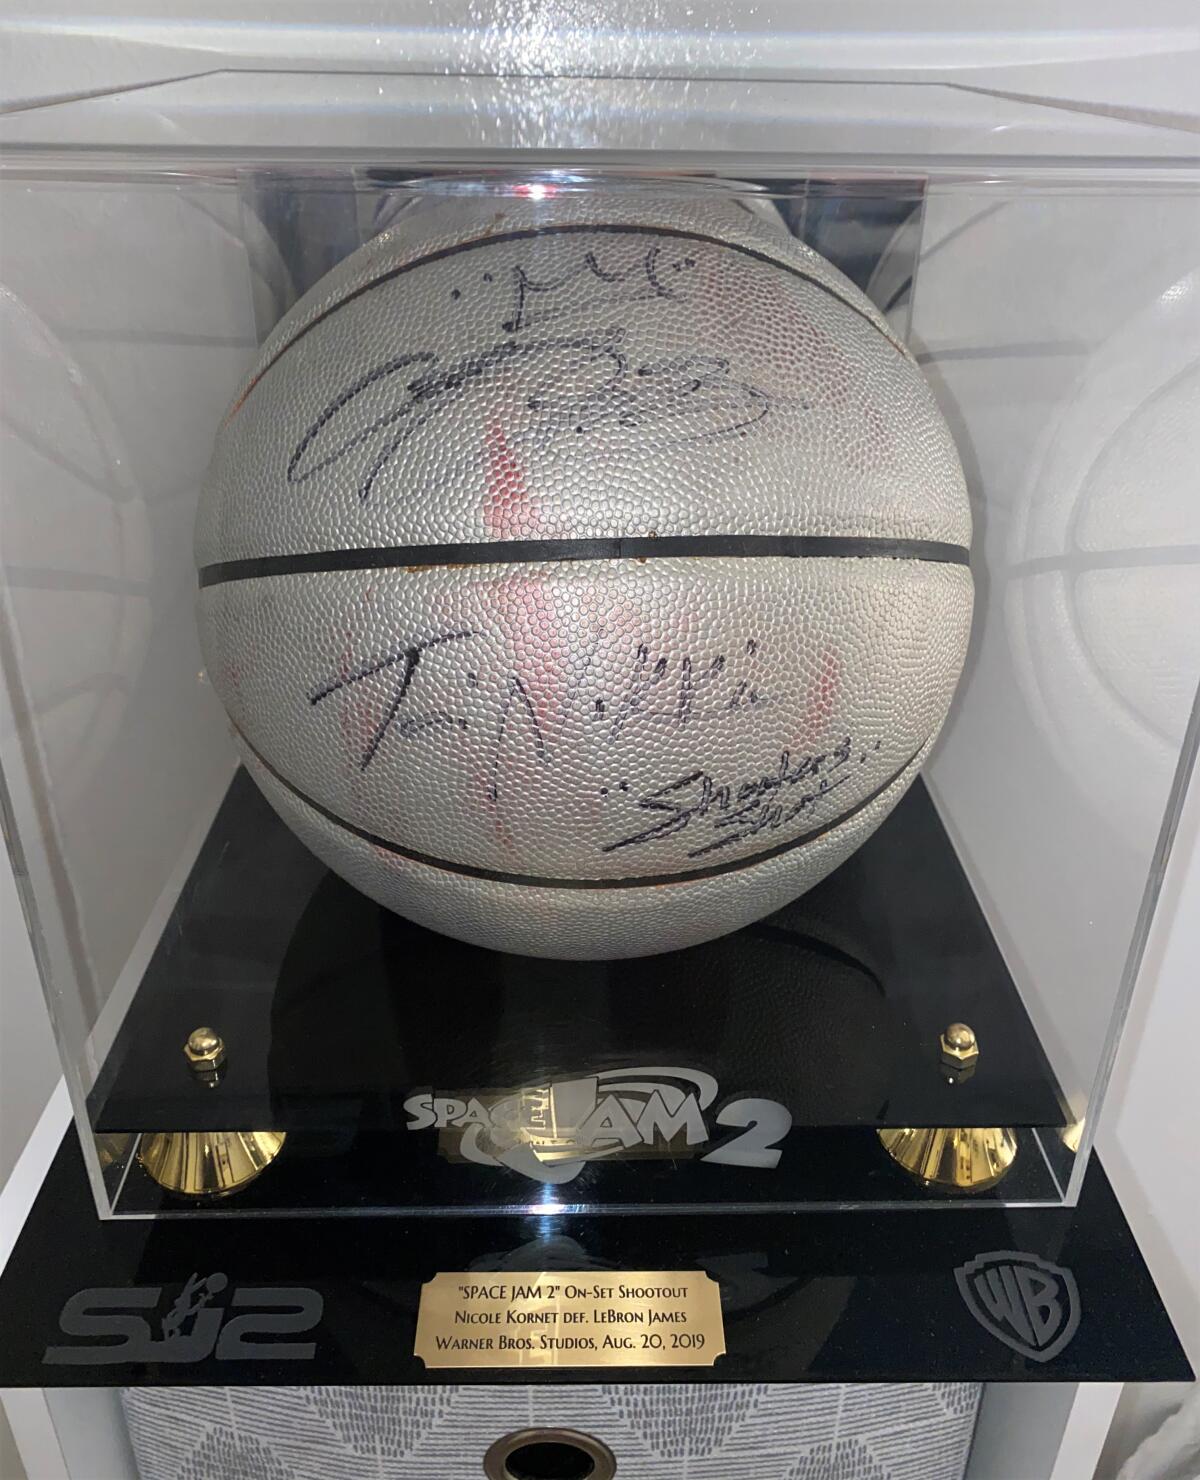 The ball Nicole Kornet won, signed by LeBron James, after she beat him in an on-set shooting competition.